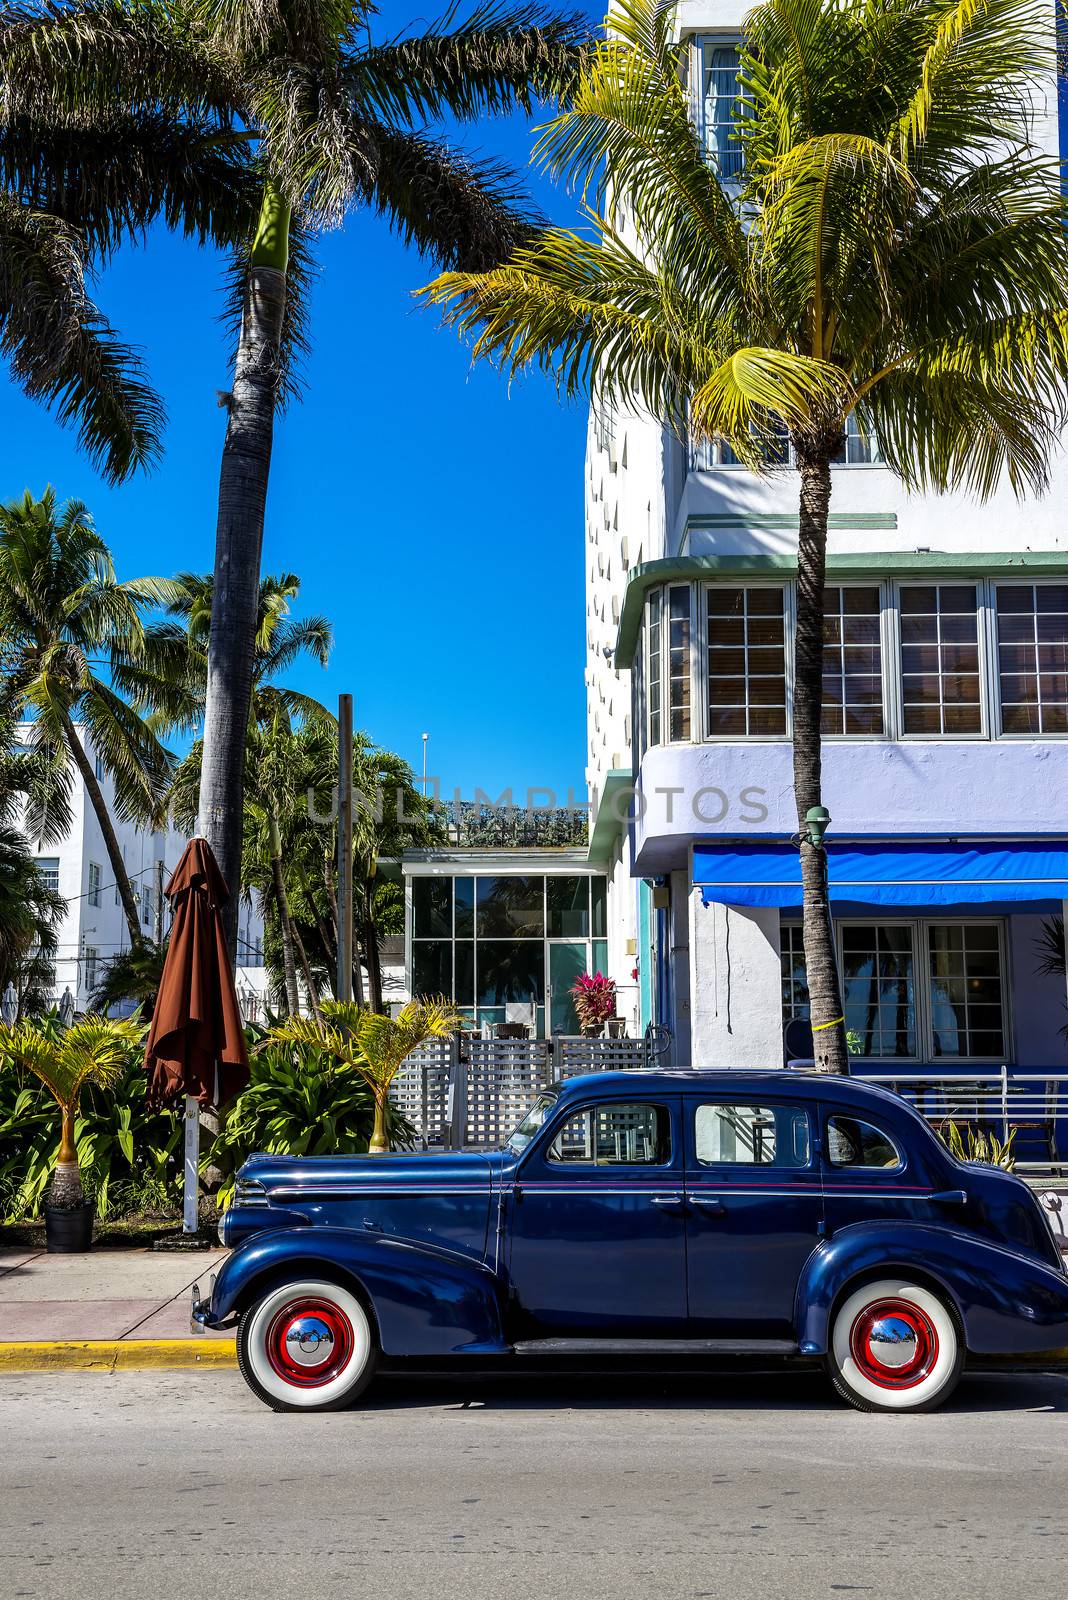 MIAMI BEACH - MARCH 20. Vintage Car Parked along Ocean Drive in the Famous Art Deco District in South Beach. South Beach, FL, March 20, 2011. 